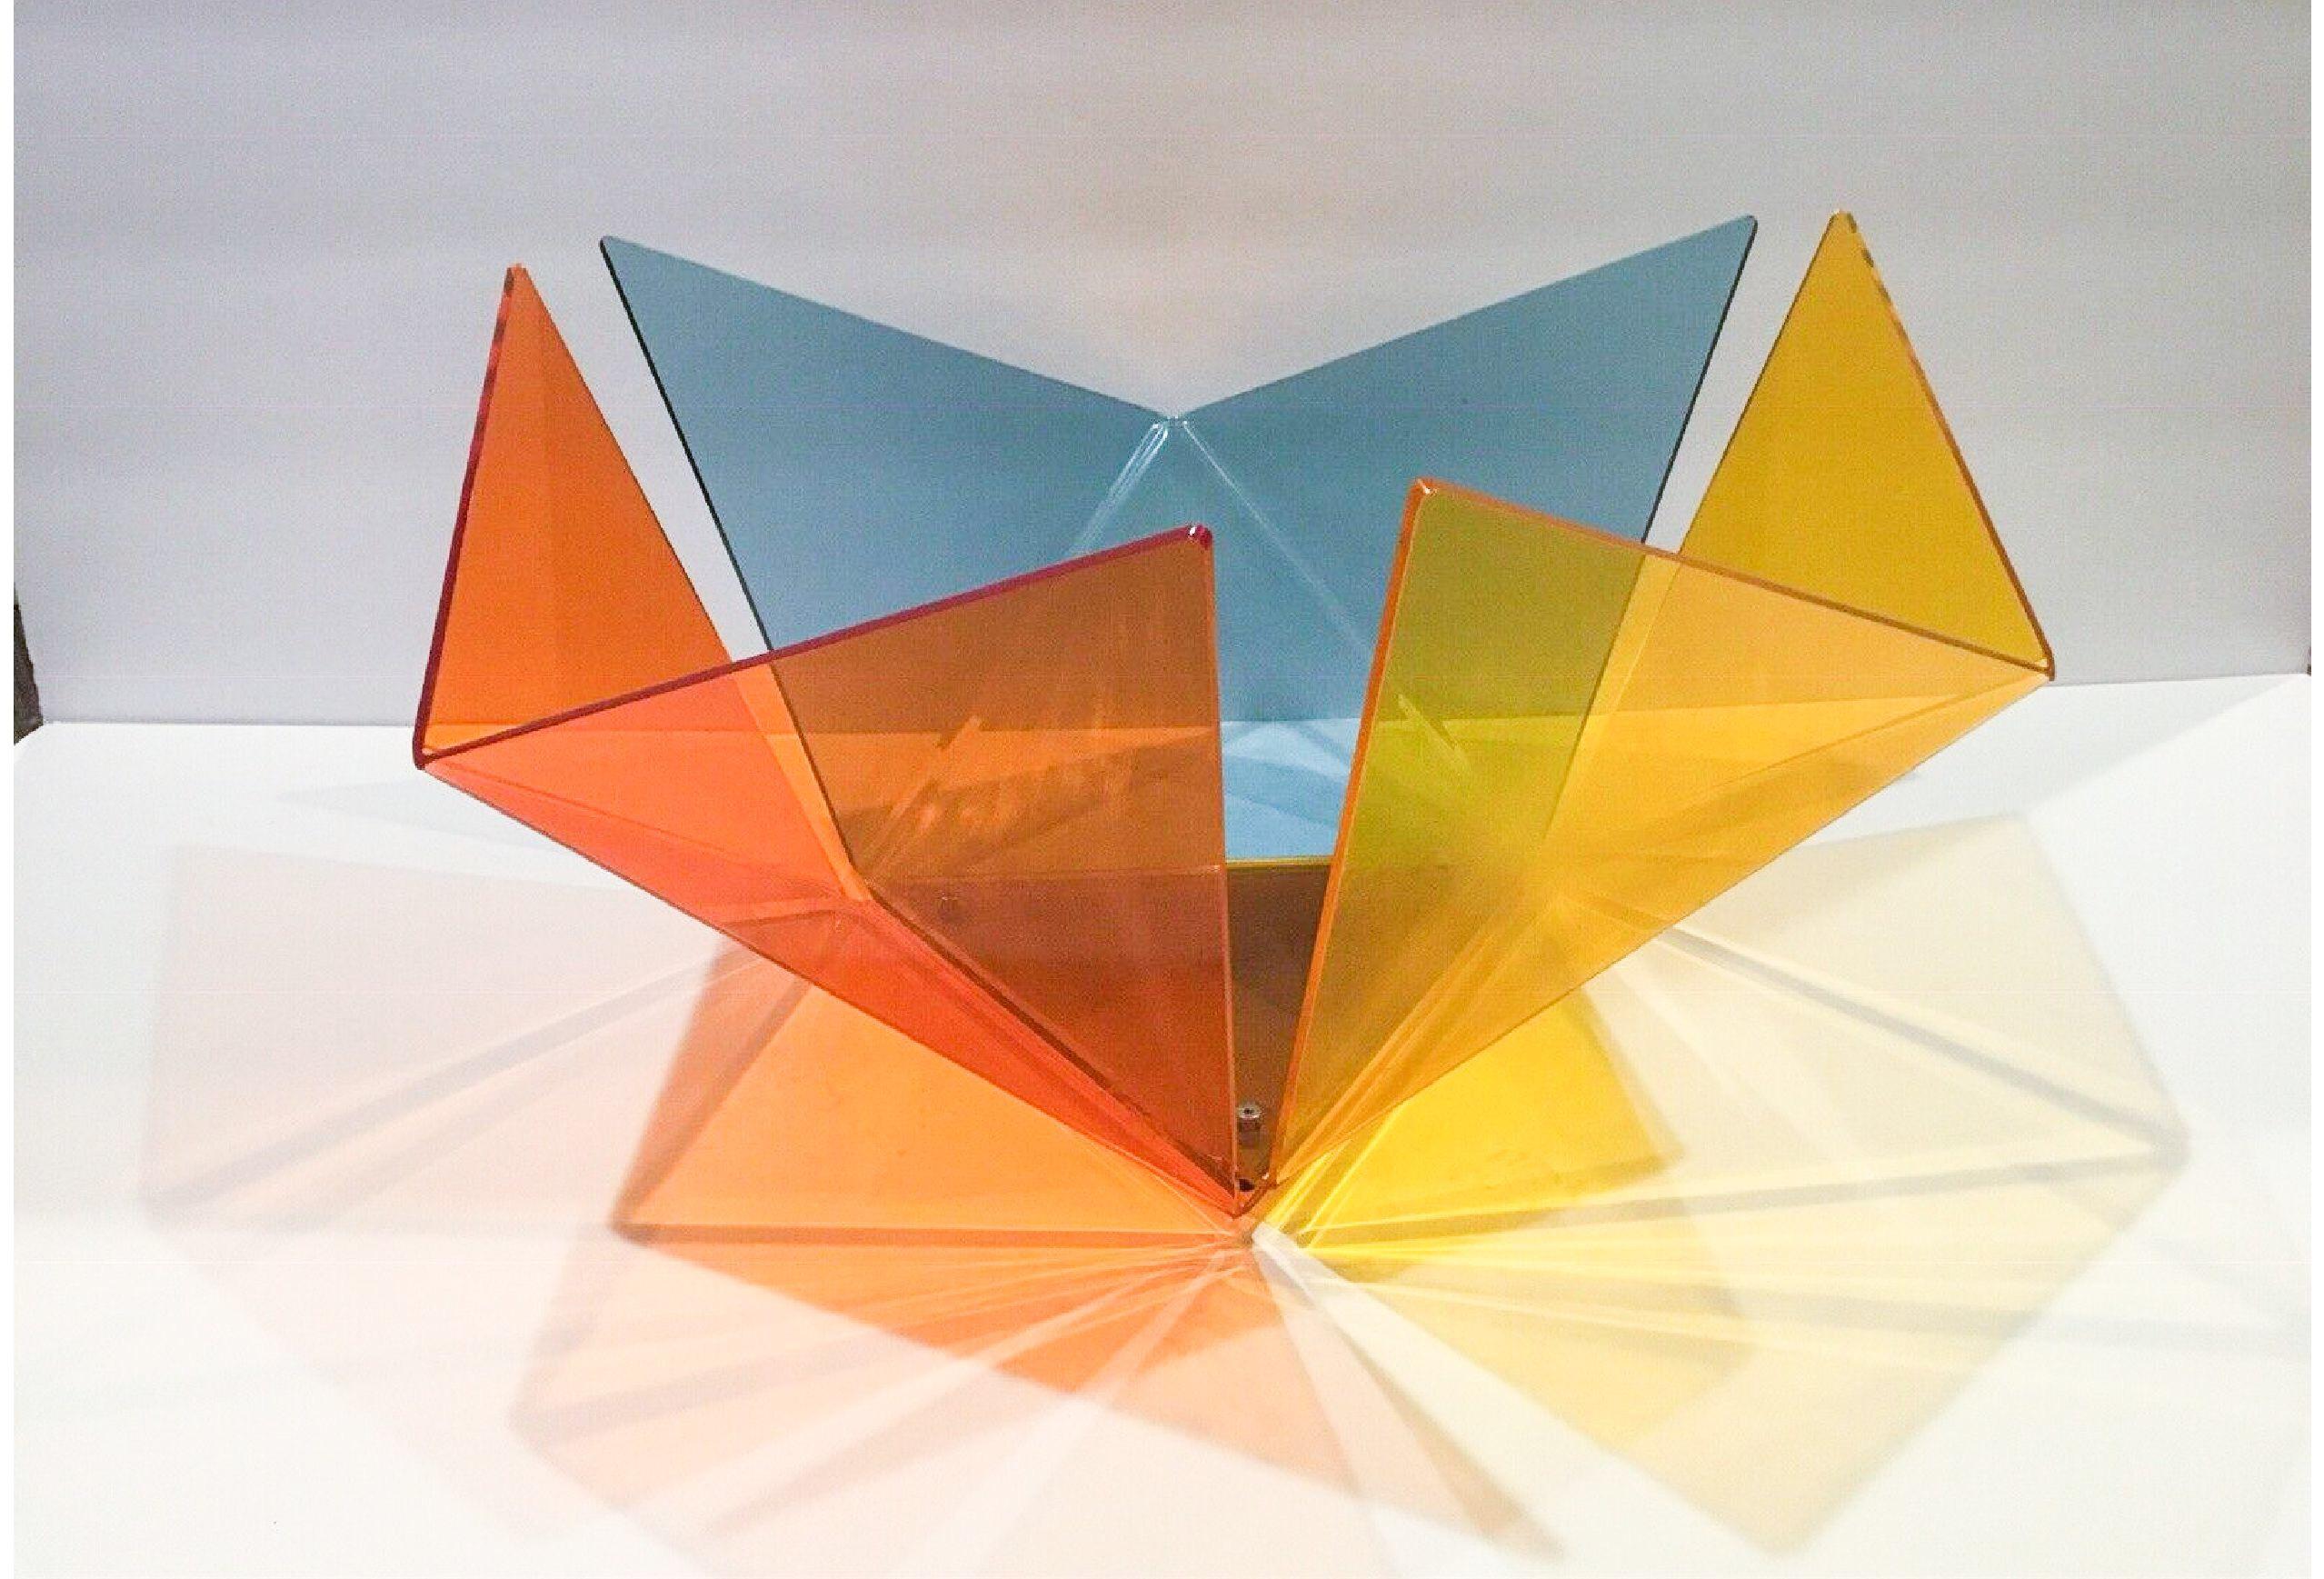 Modern Geometric color theory Lucite fruit bowl by Procter-Rihl for MoMA NY, 1997.

Space-Lily (or SPACELILY) fruit bowl created by Procter- Rihl, a famed architecture and design company from the UK, in limited quantity of 300 in 1996-1997 to be